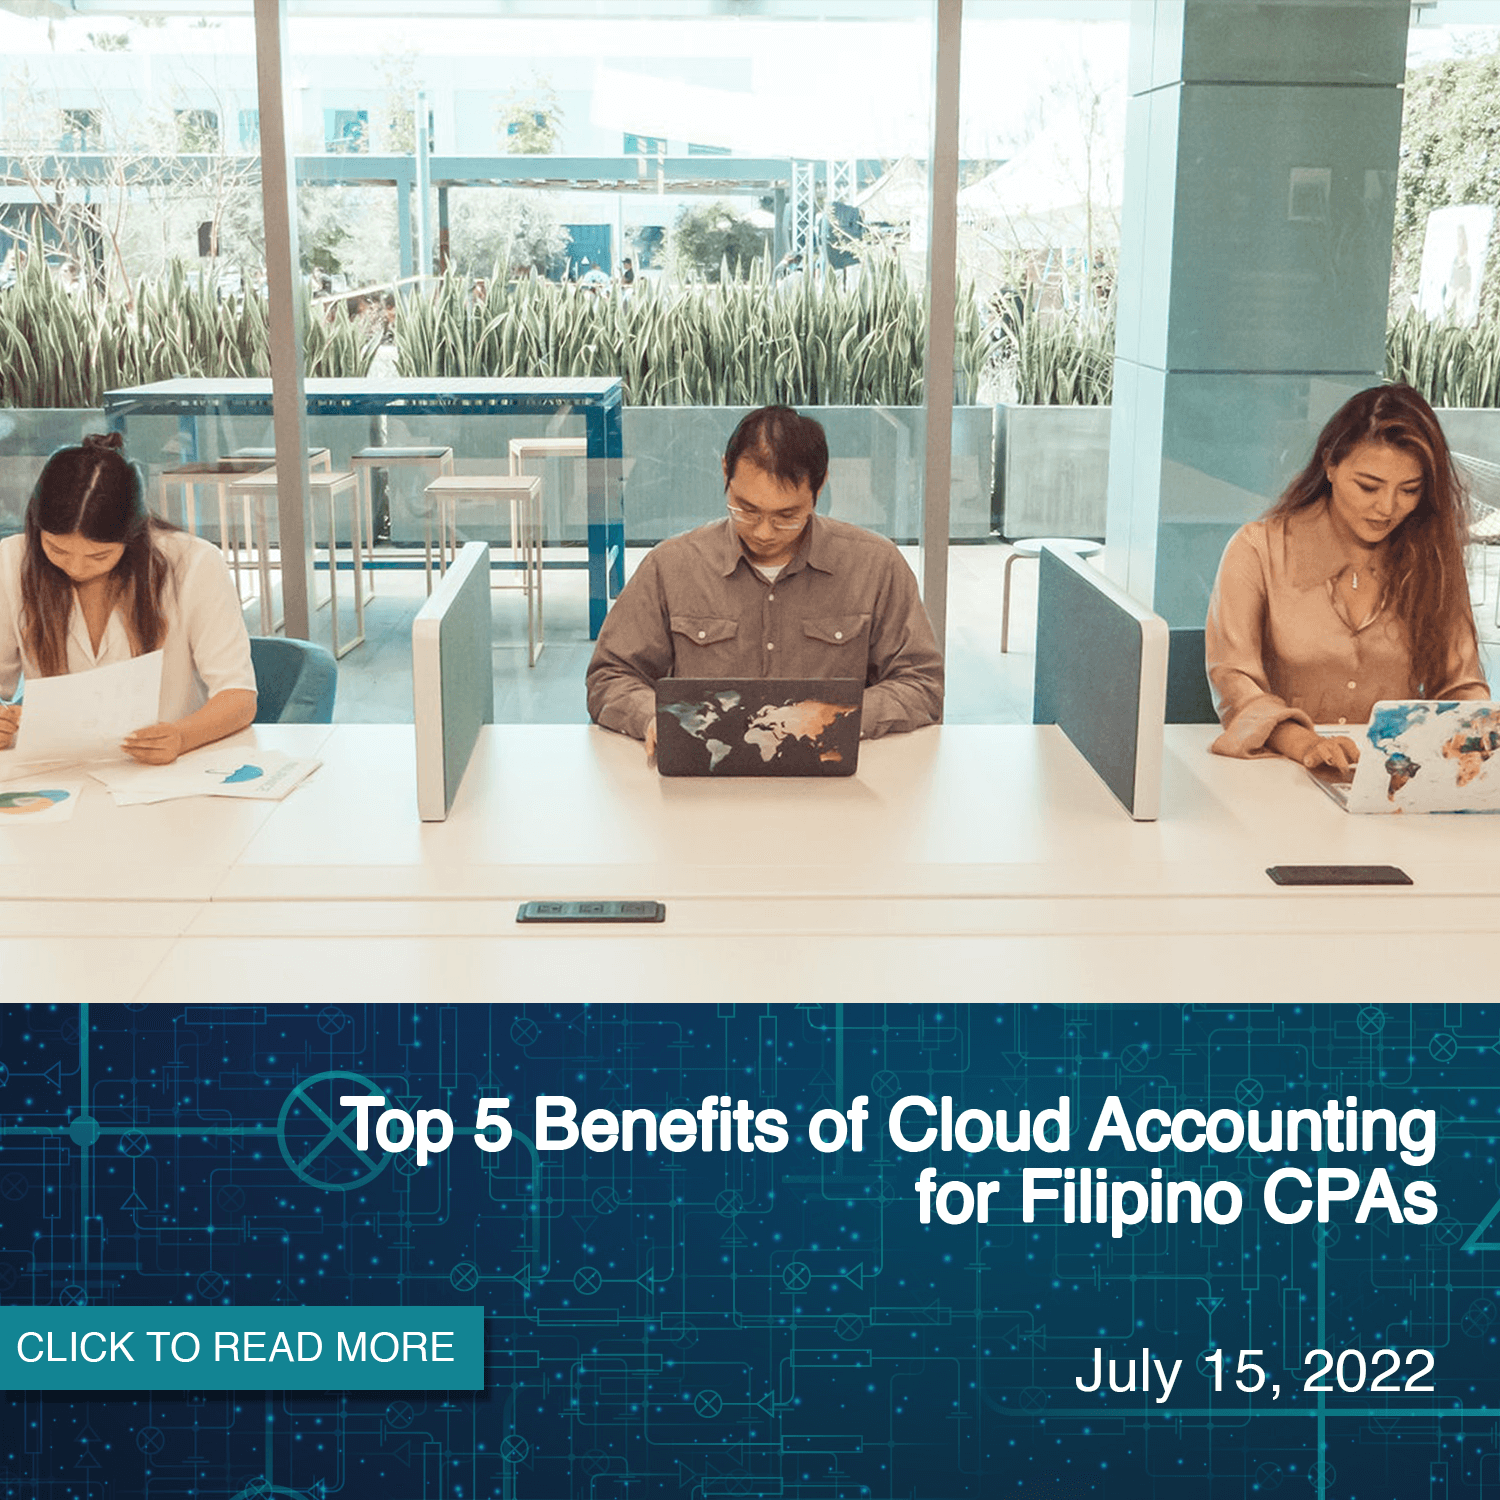 Top 5 Benefits of Cloud Accounting for Filipino CPAs